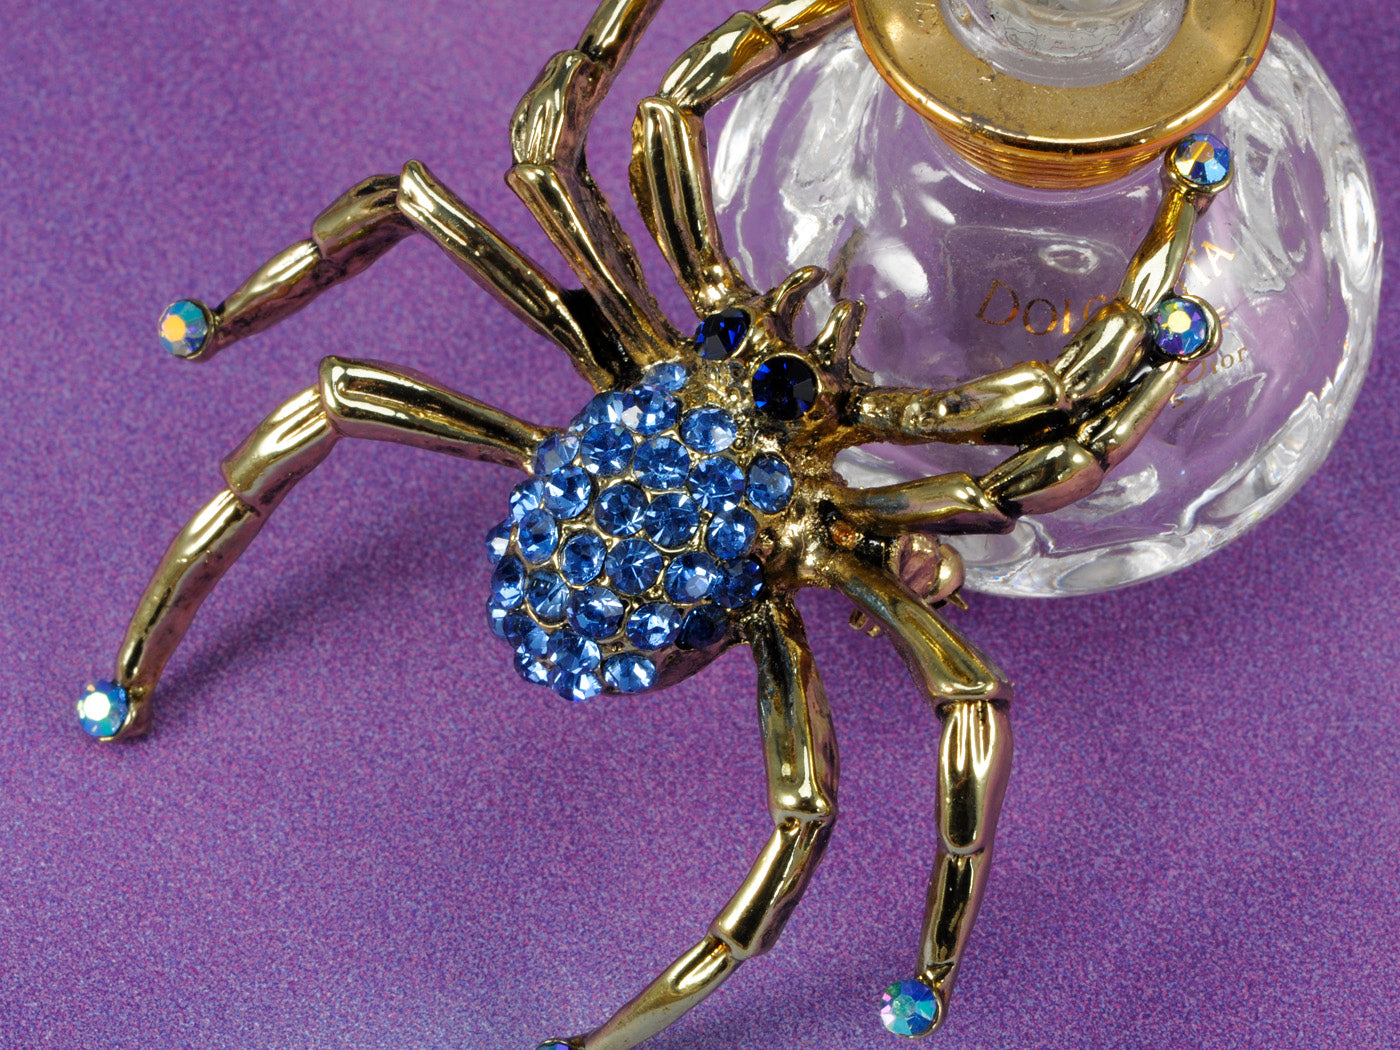 Antique Sapphire Blue Colored Spider Bug Brooch Pin